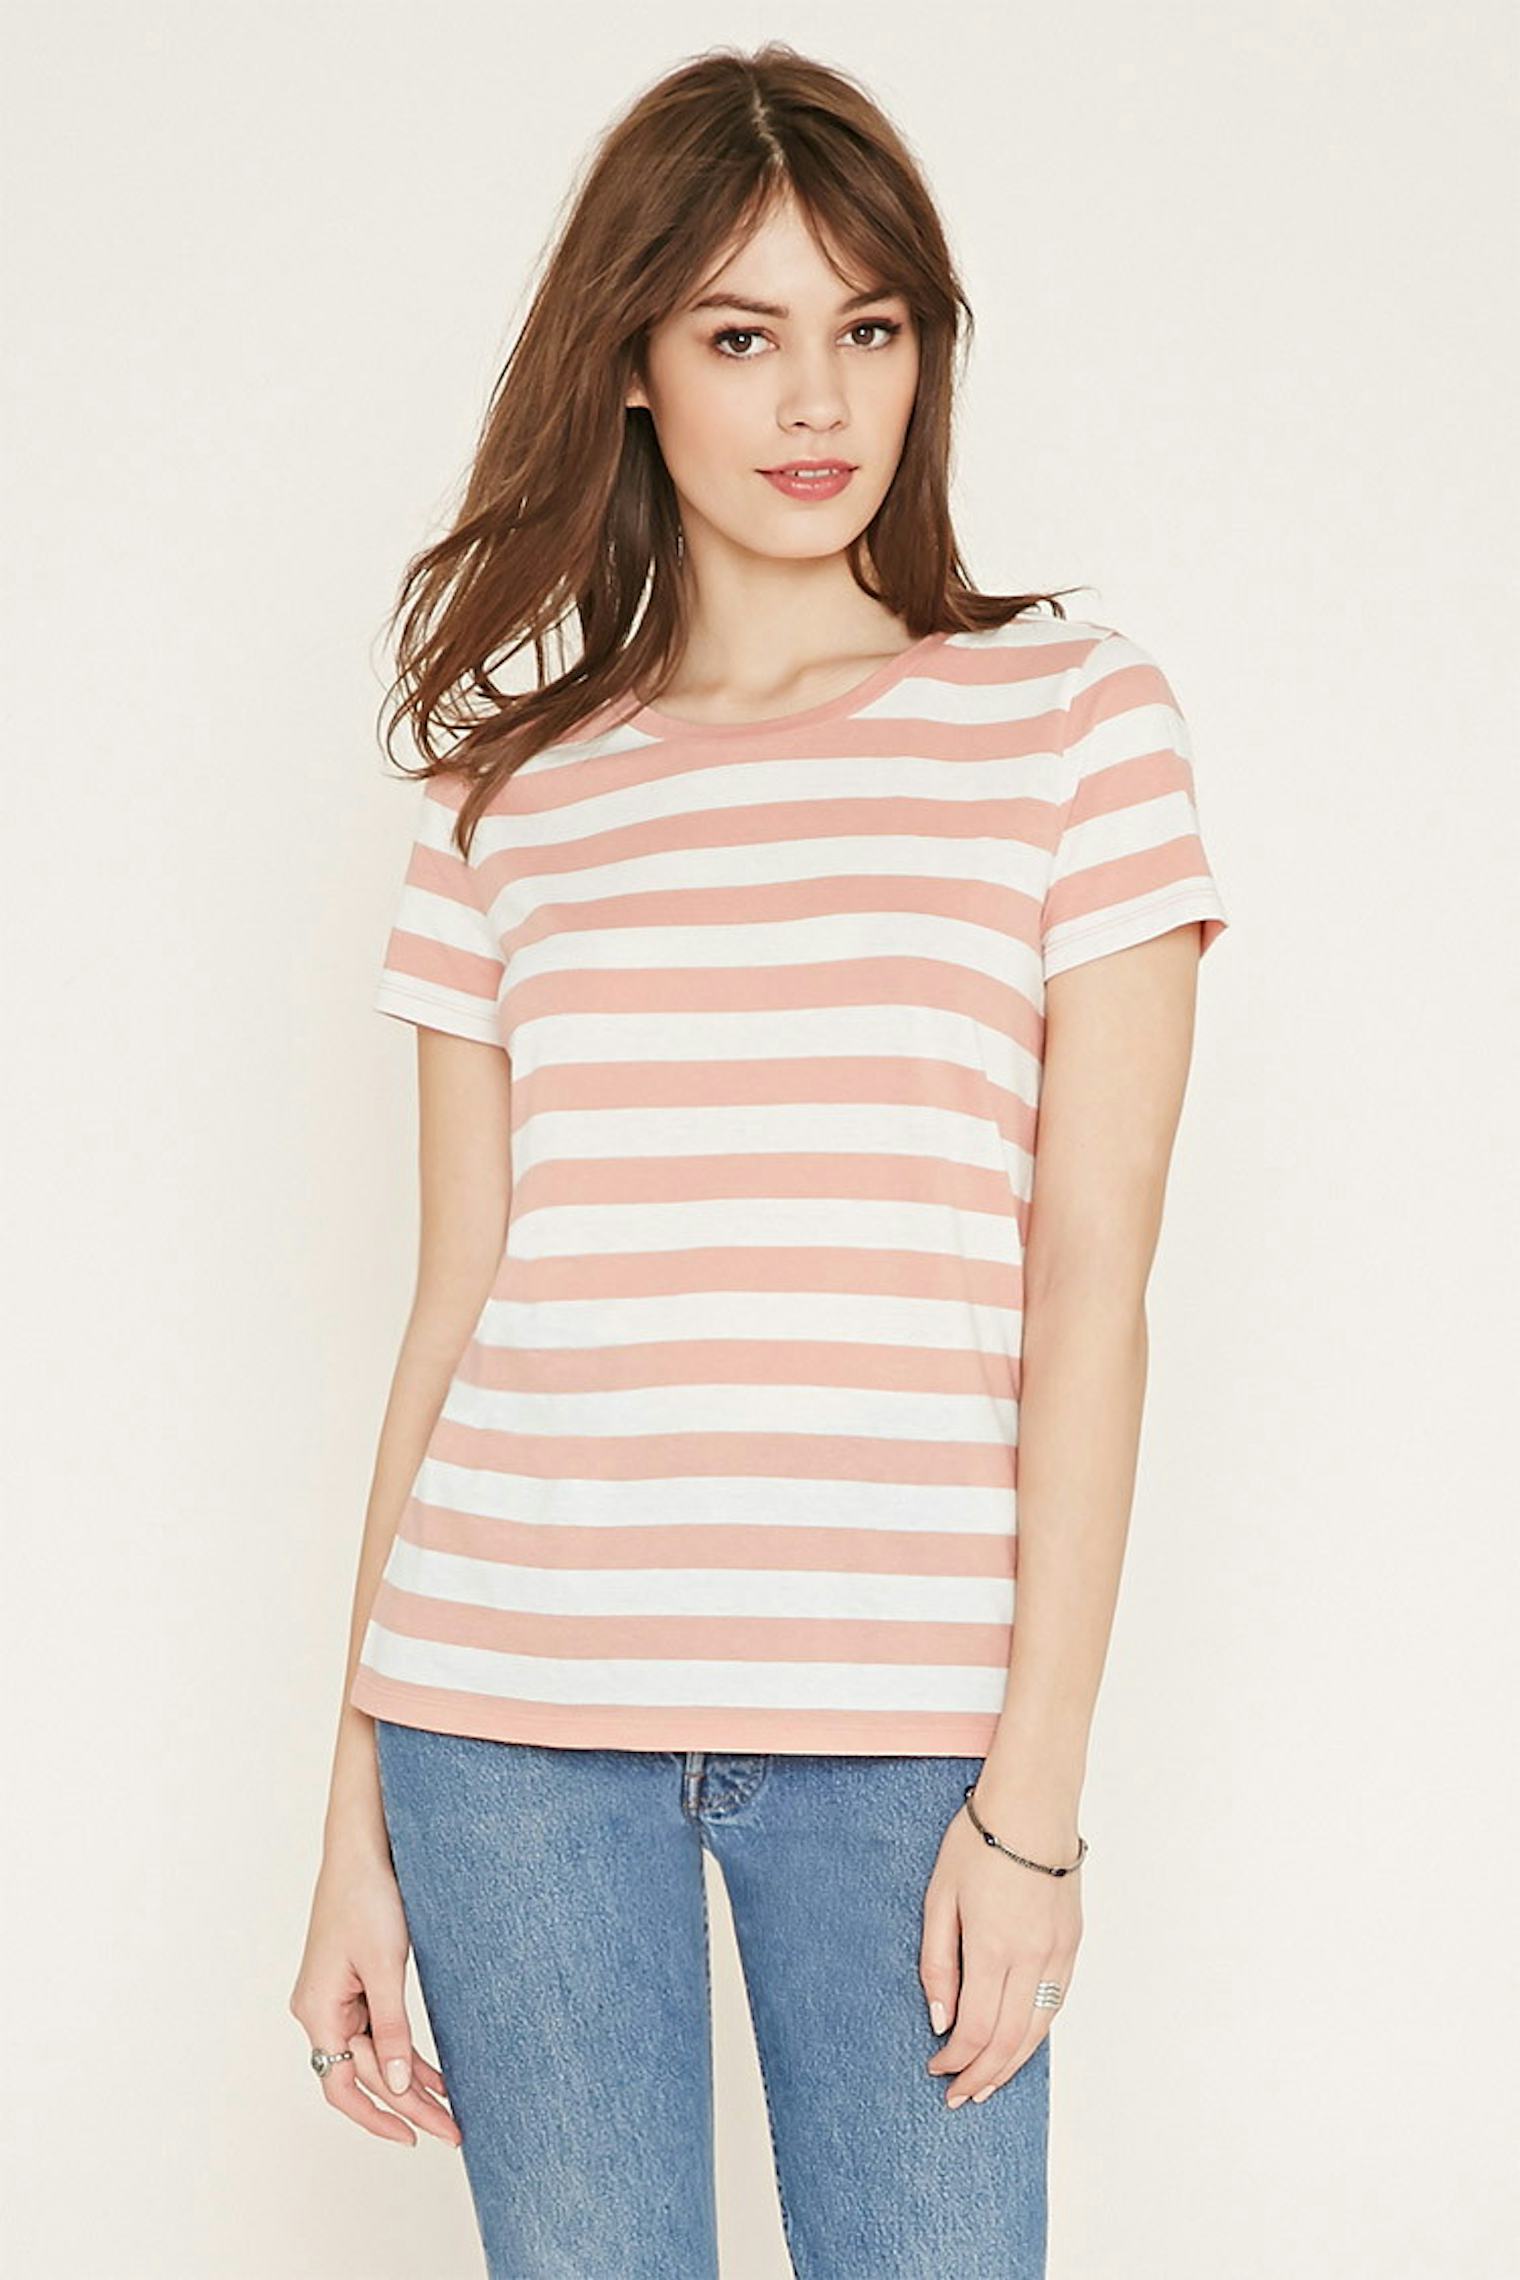 Ways To Wear A Striped Shirt With Every Outfit